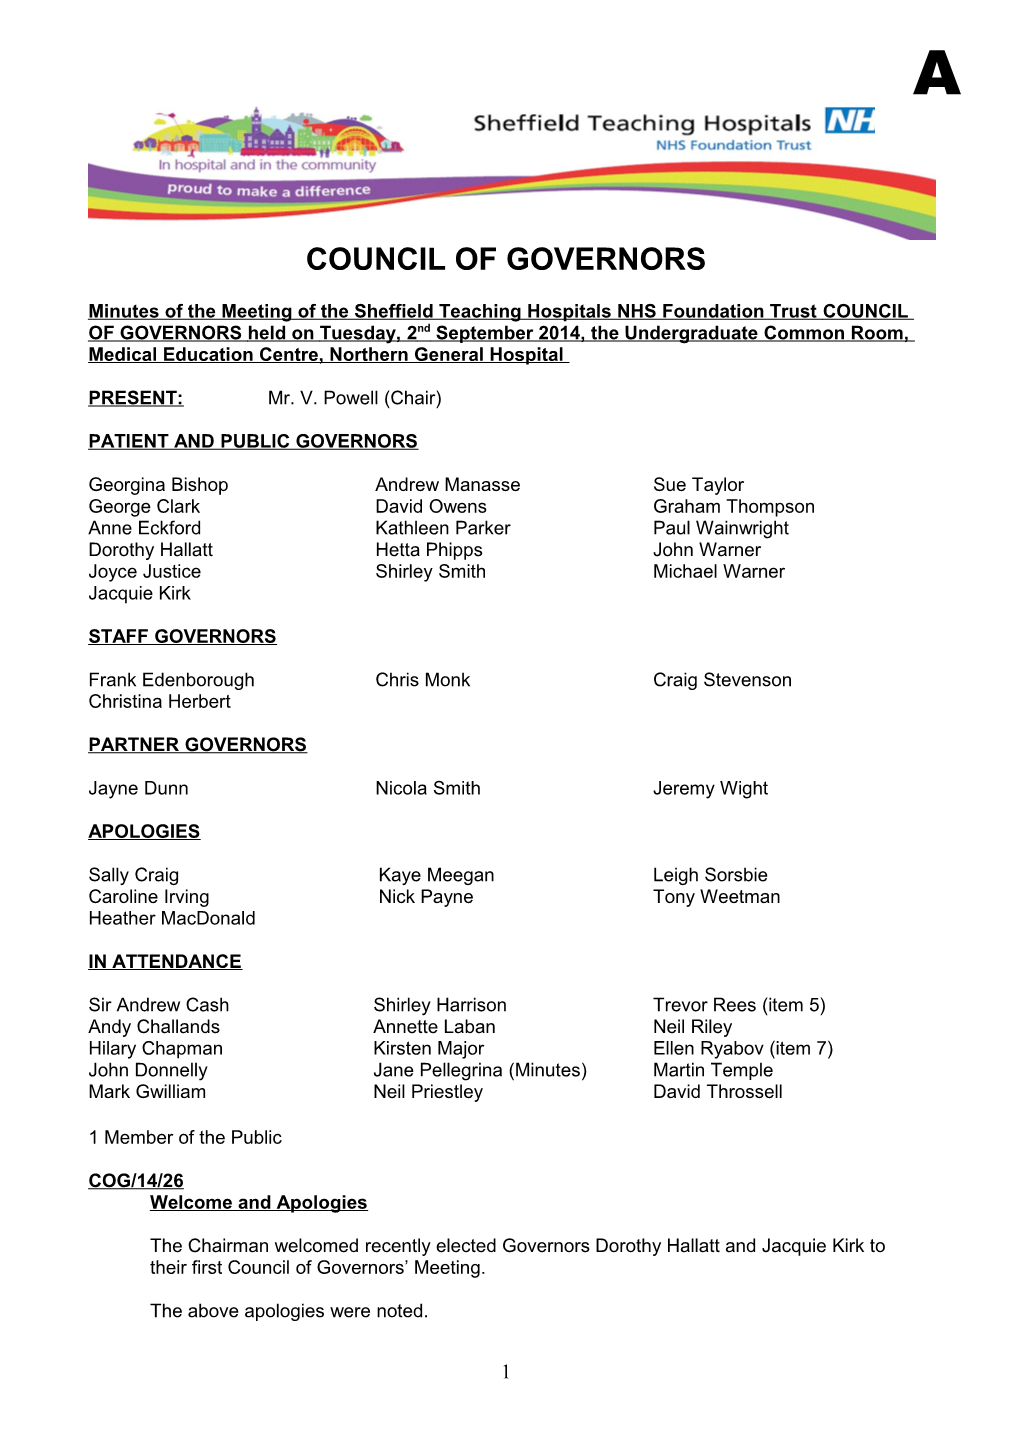 Council of Governors